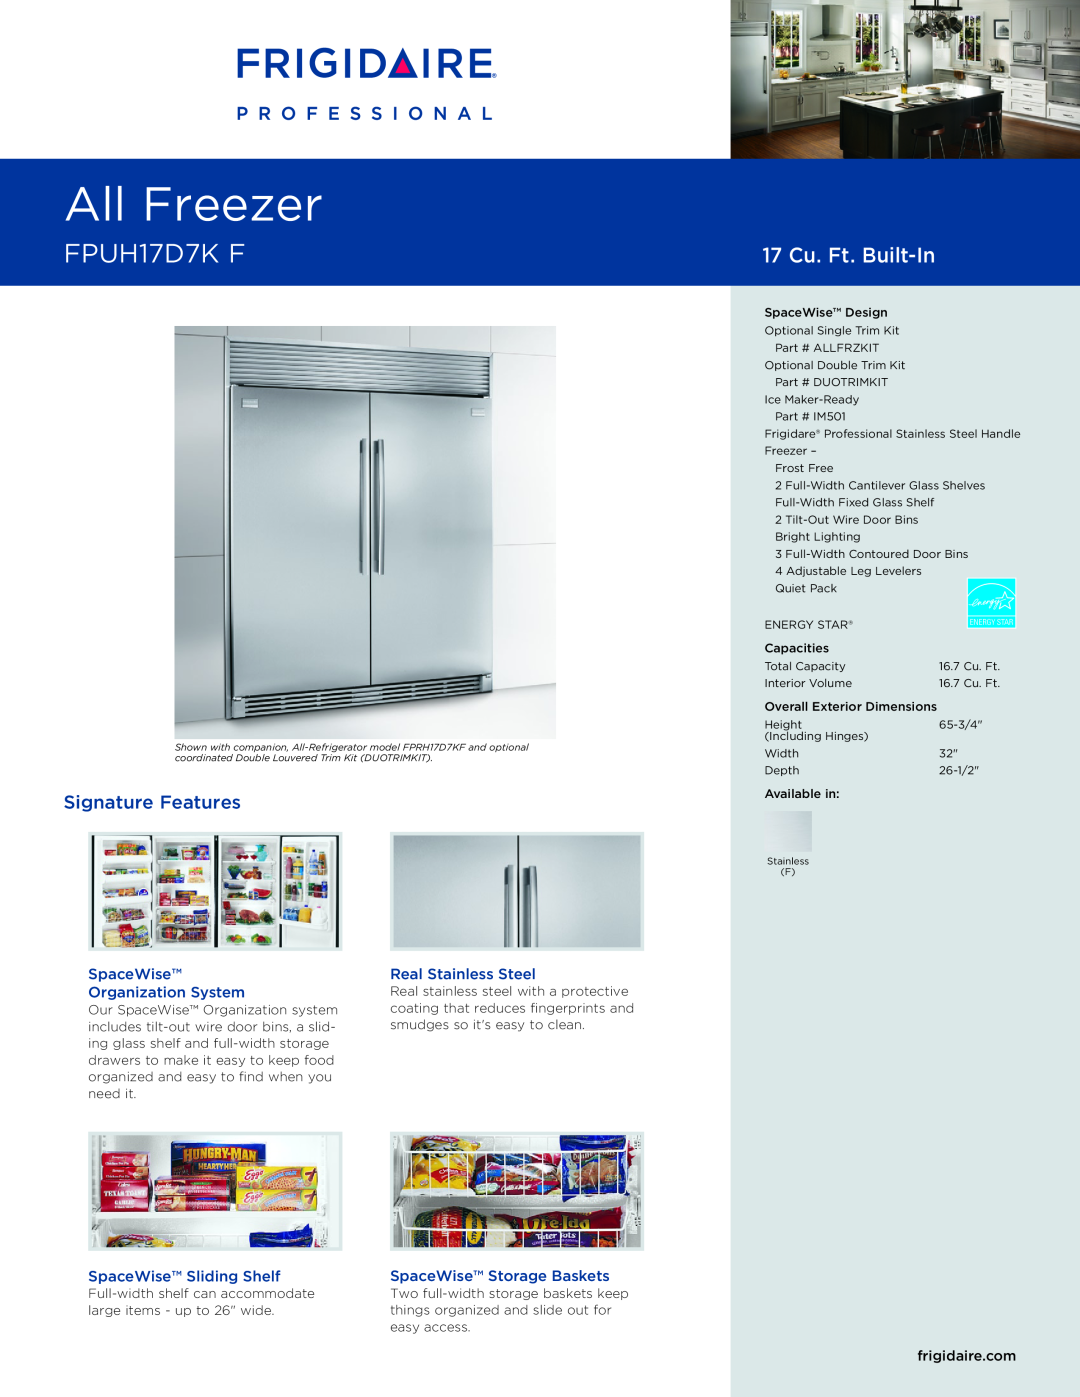 Frigidaire FPUH17D7KF dimensions SpaceWise Organization System, Real Stainless Steel, SpaceWise Sliding Shelf, All Freezer 